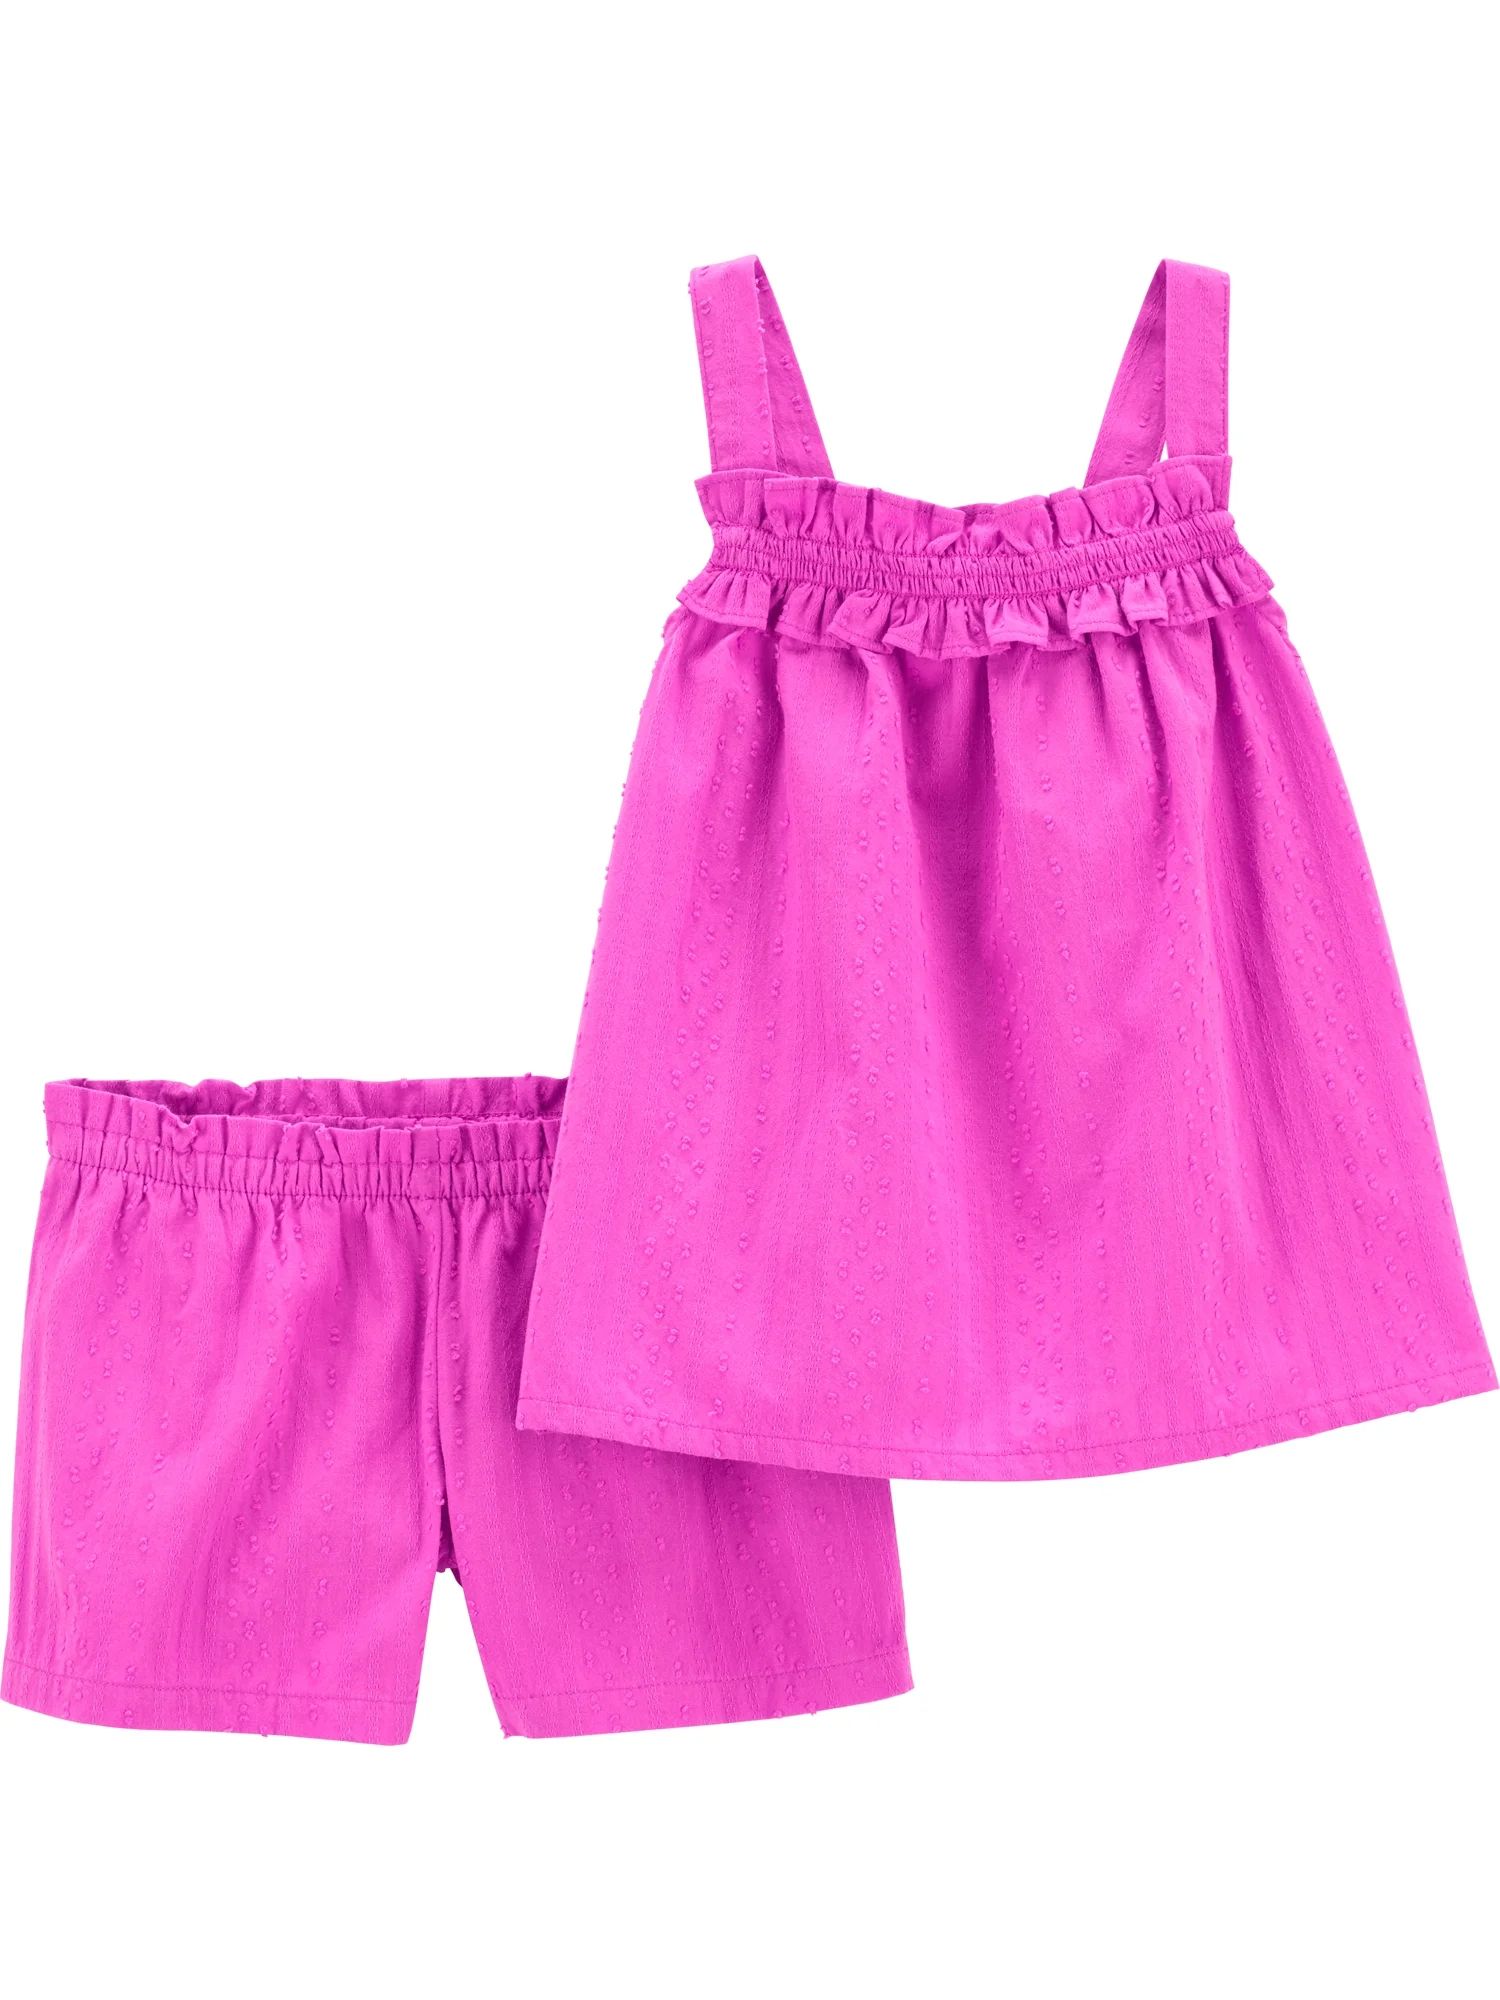 Carter's Child of Mine Toddler Girl Shorts Outfit Set, 2-Piece, Sizes 12M-5T | Walmart (US)